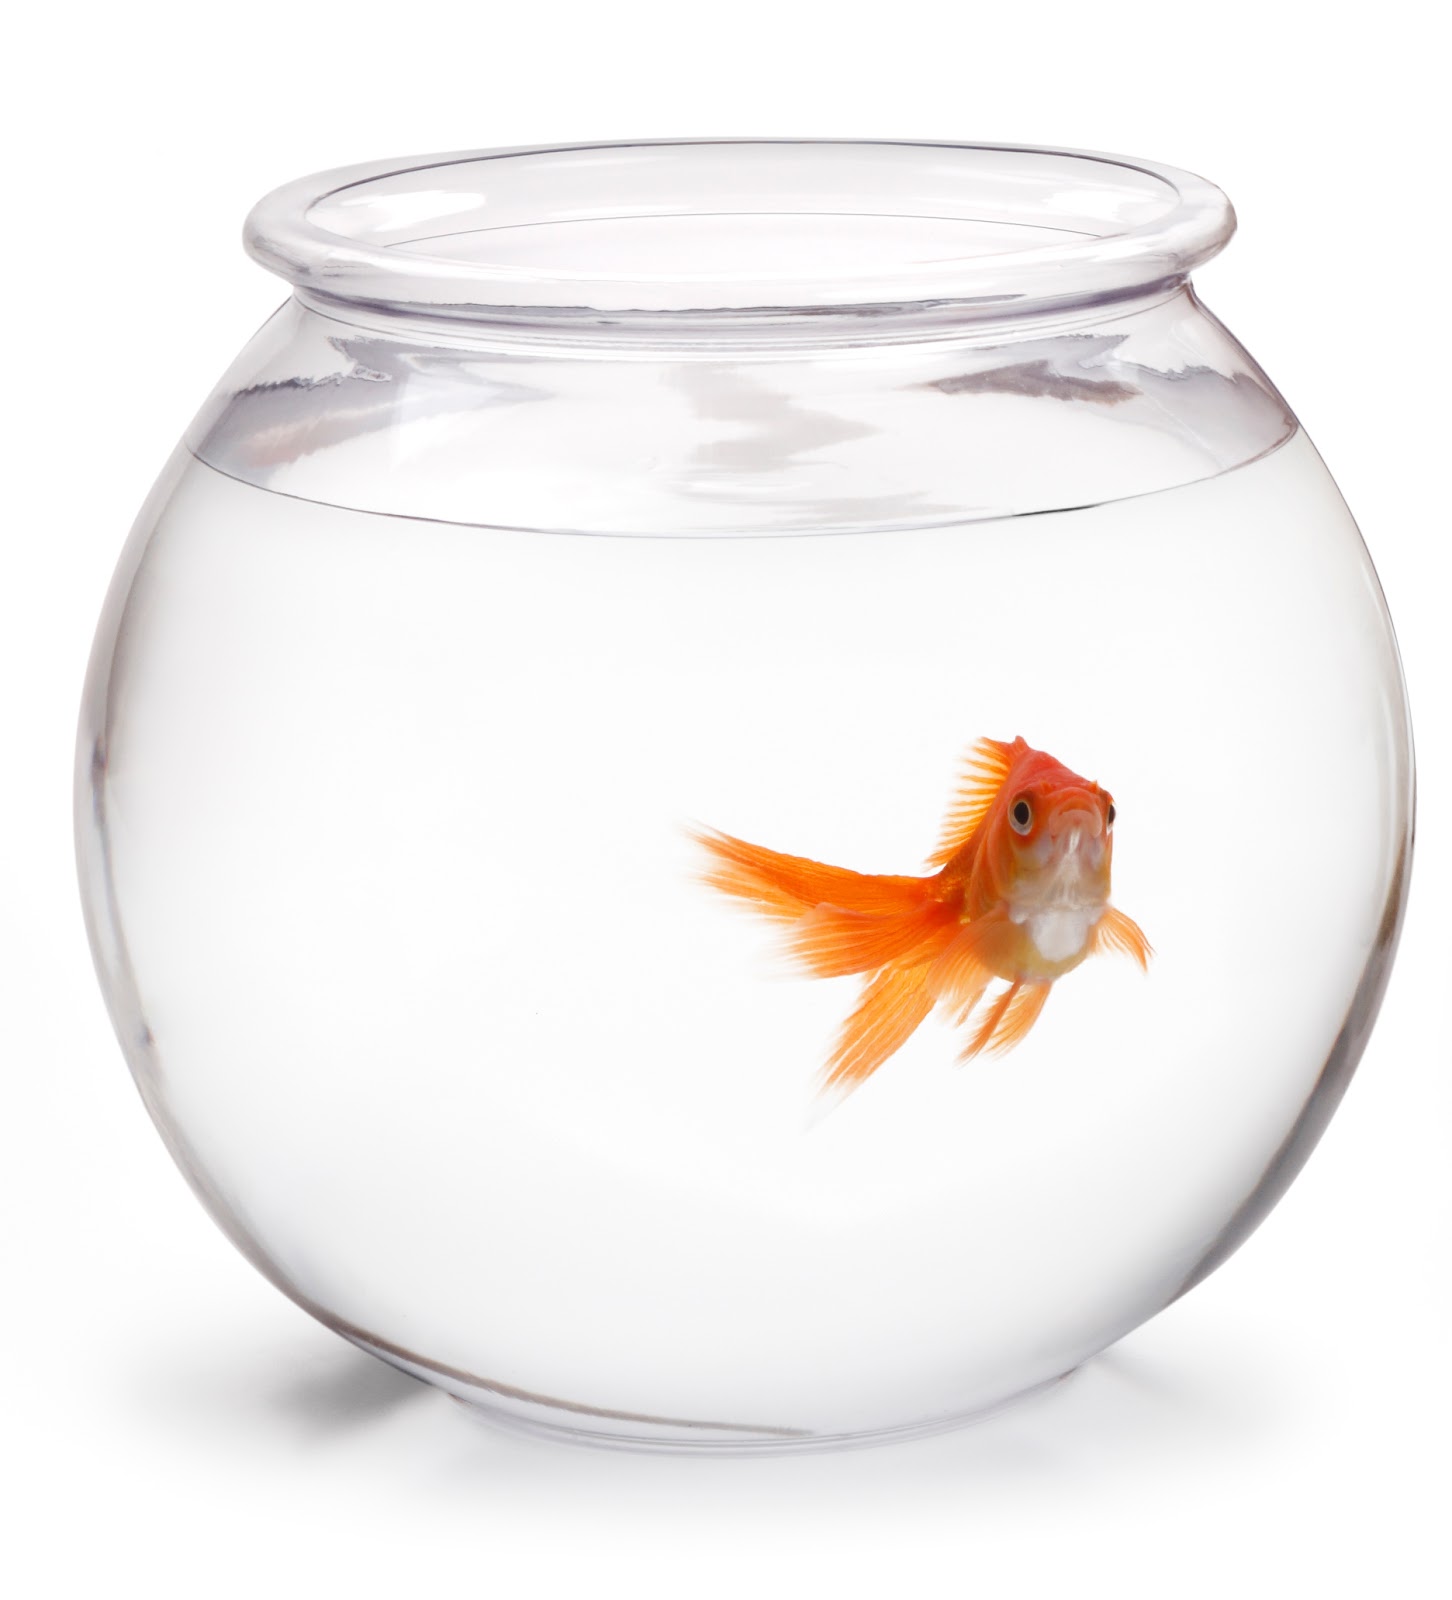 Life in the Fishbowl | Peace of my Mind